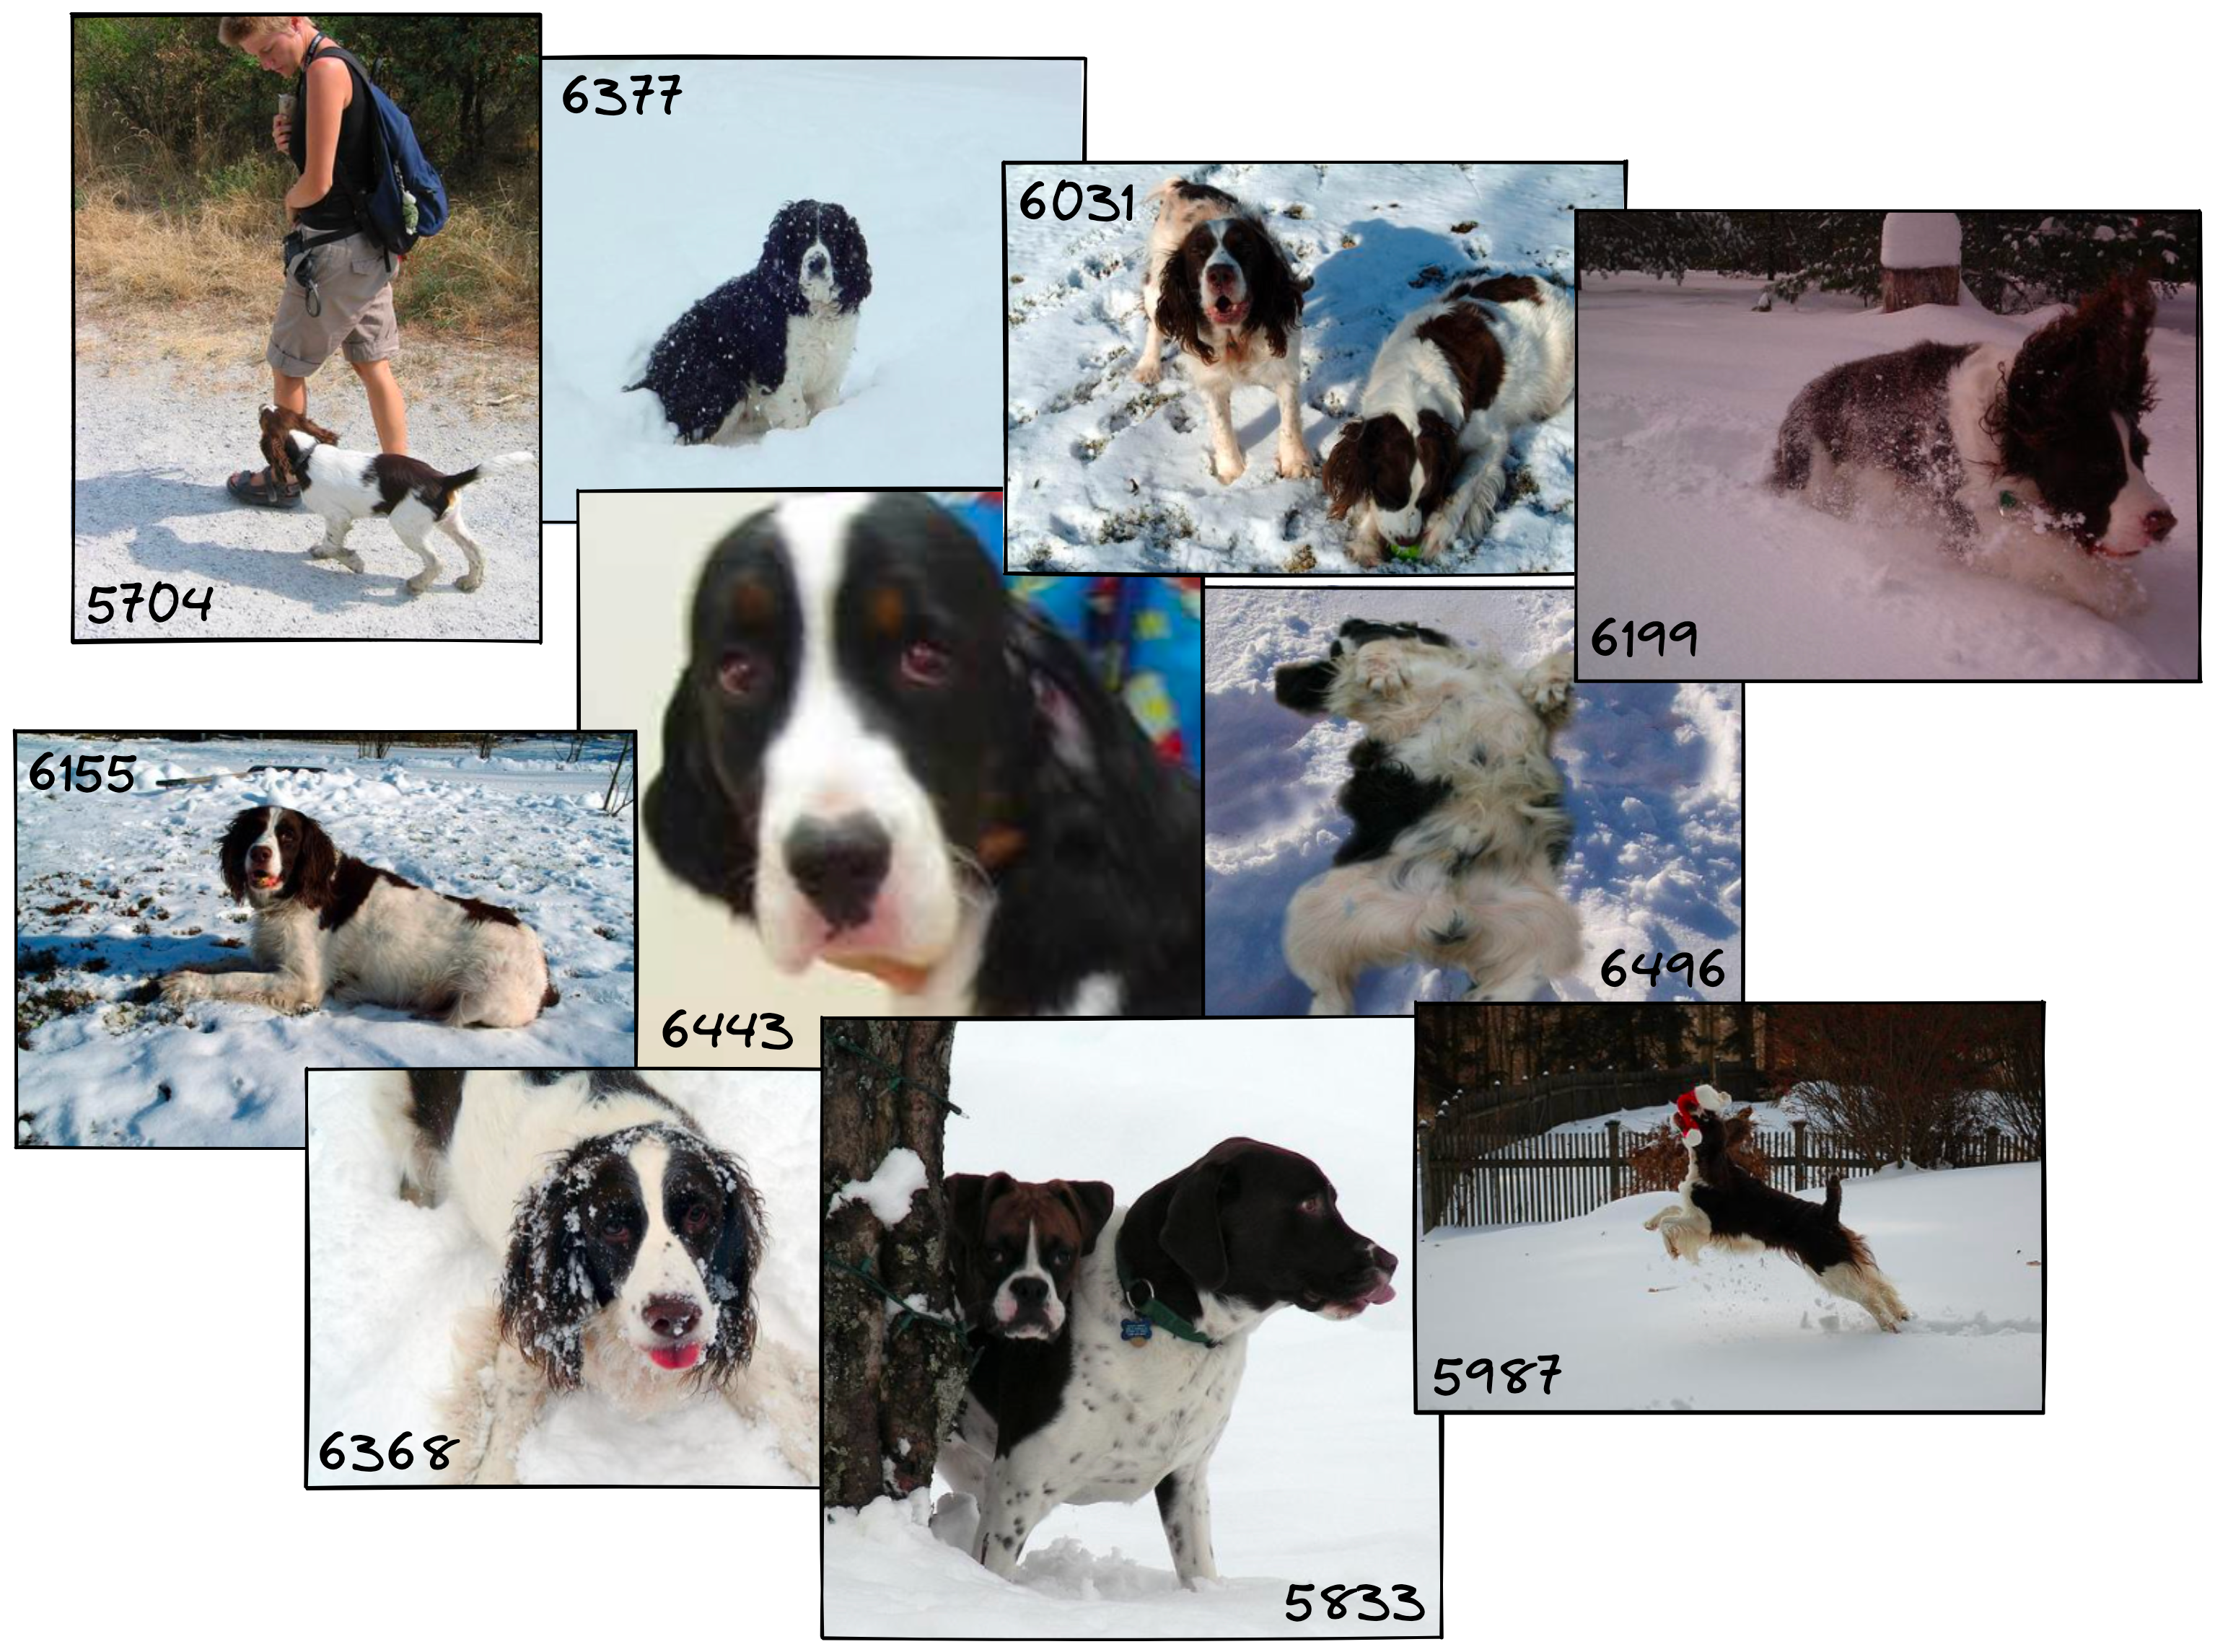 Dogs in snow results